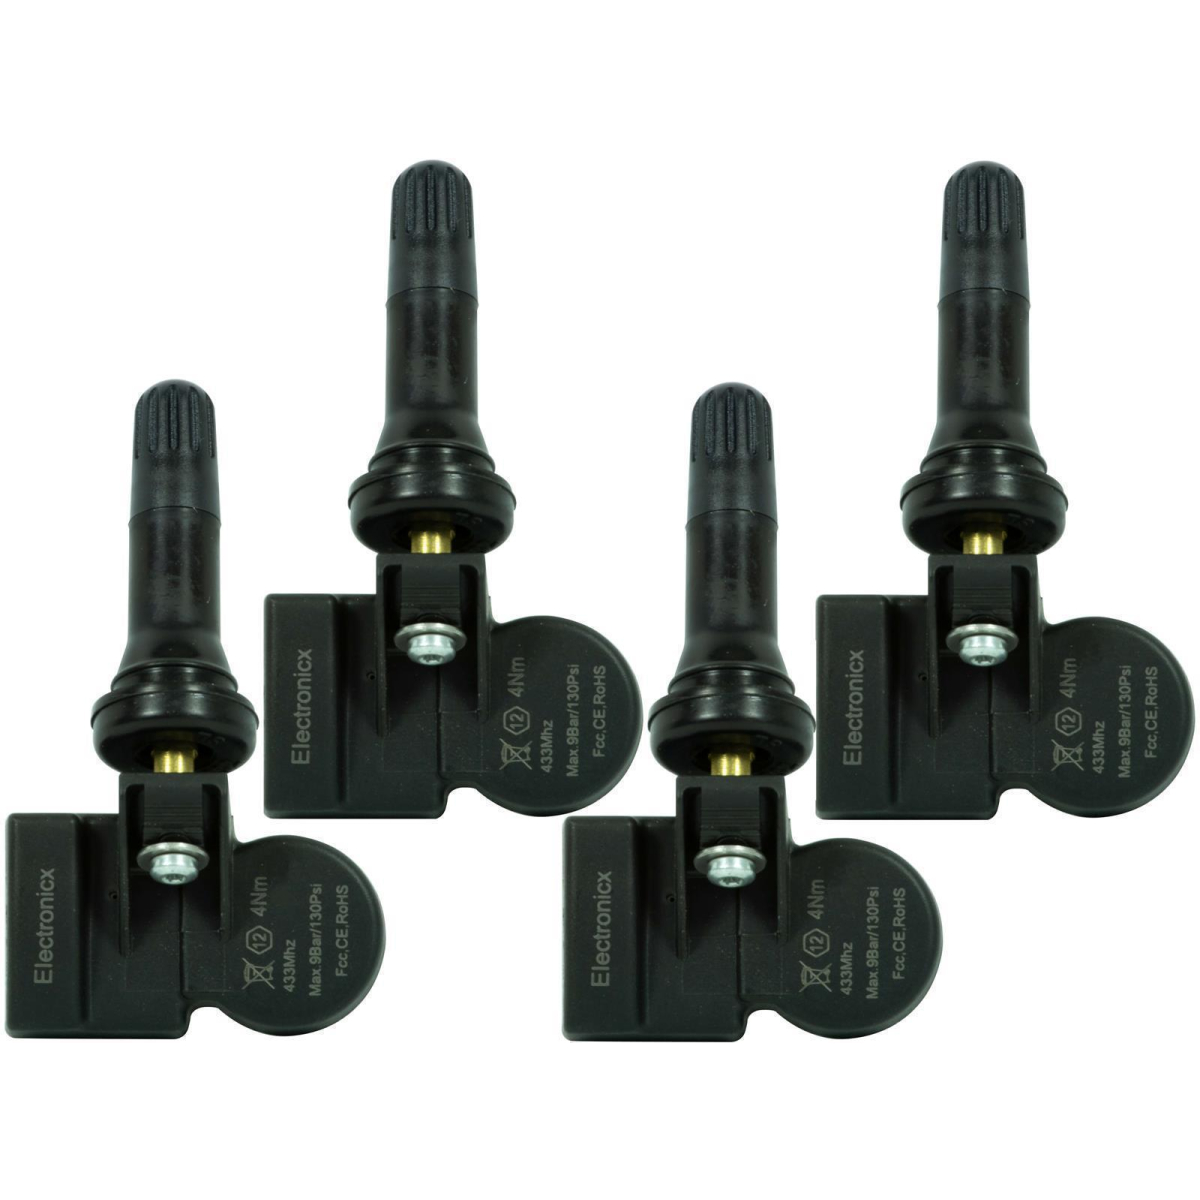 4x RDKS TPMS tire pressure sensors rubber valve for Maybach S Mercedes GLC GT AMG